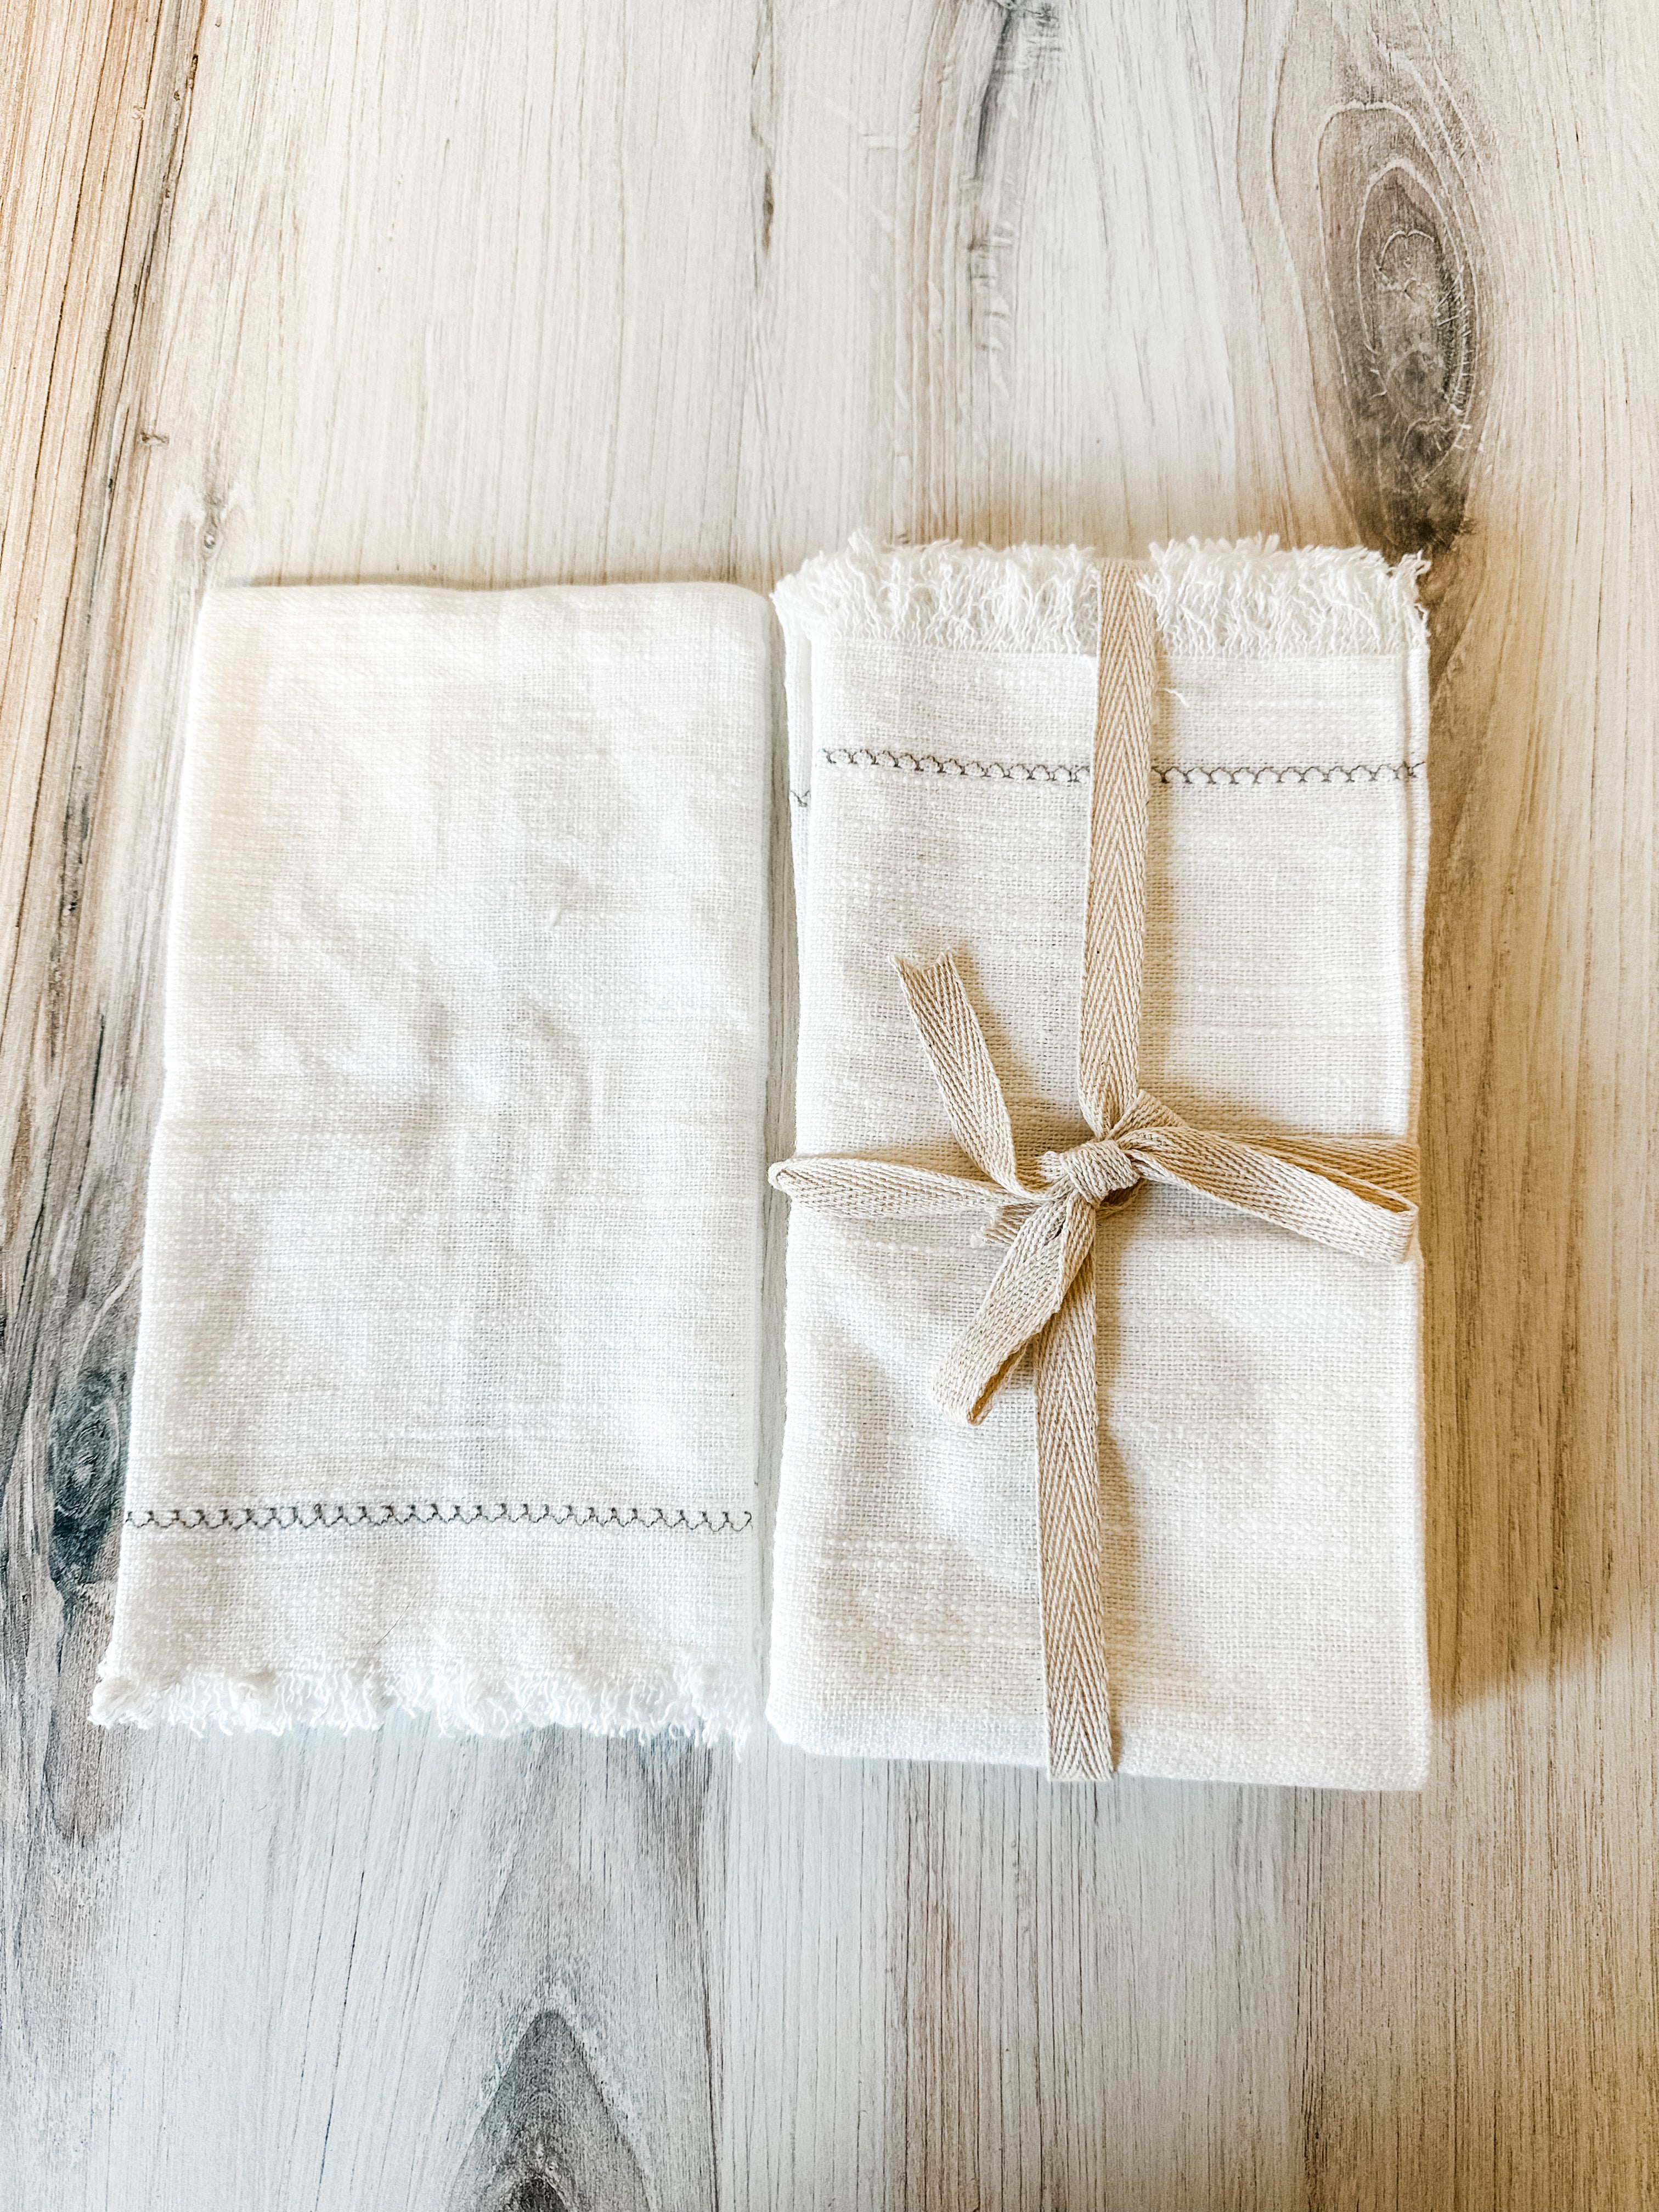 Cotton Square Embroidered Napkins, Set of 4